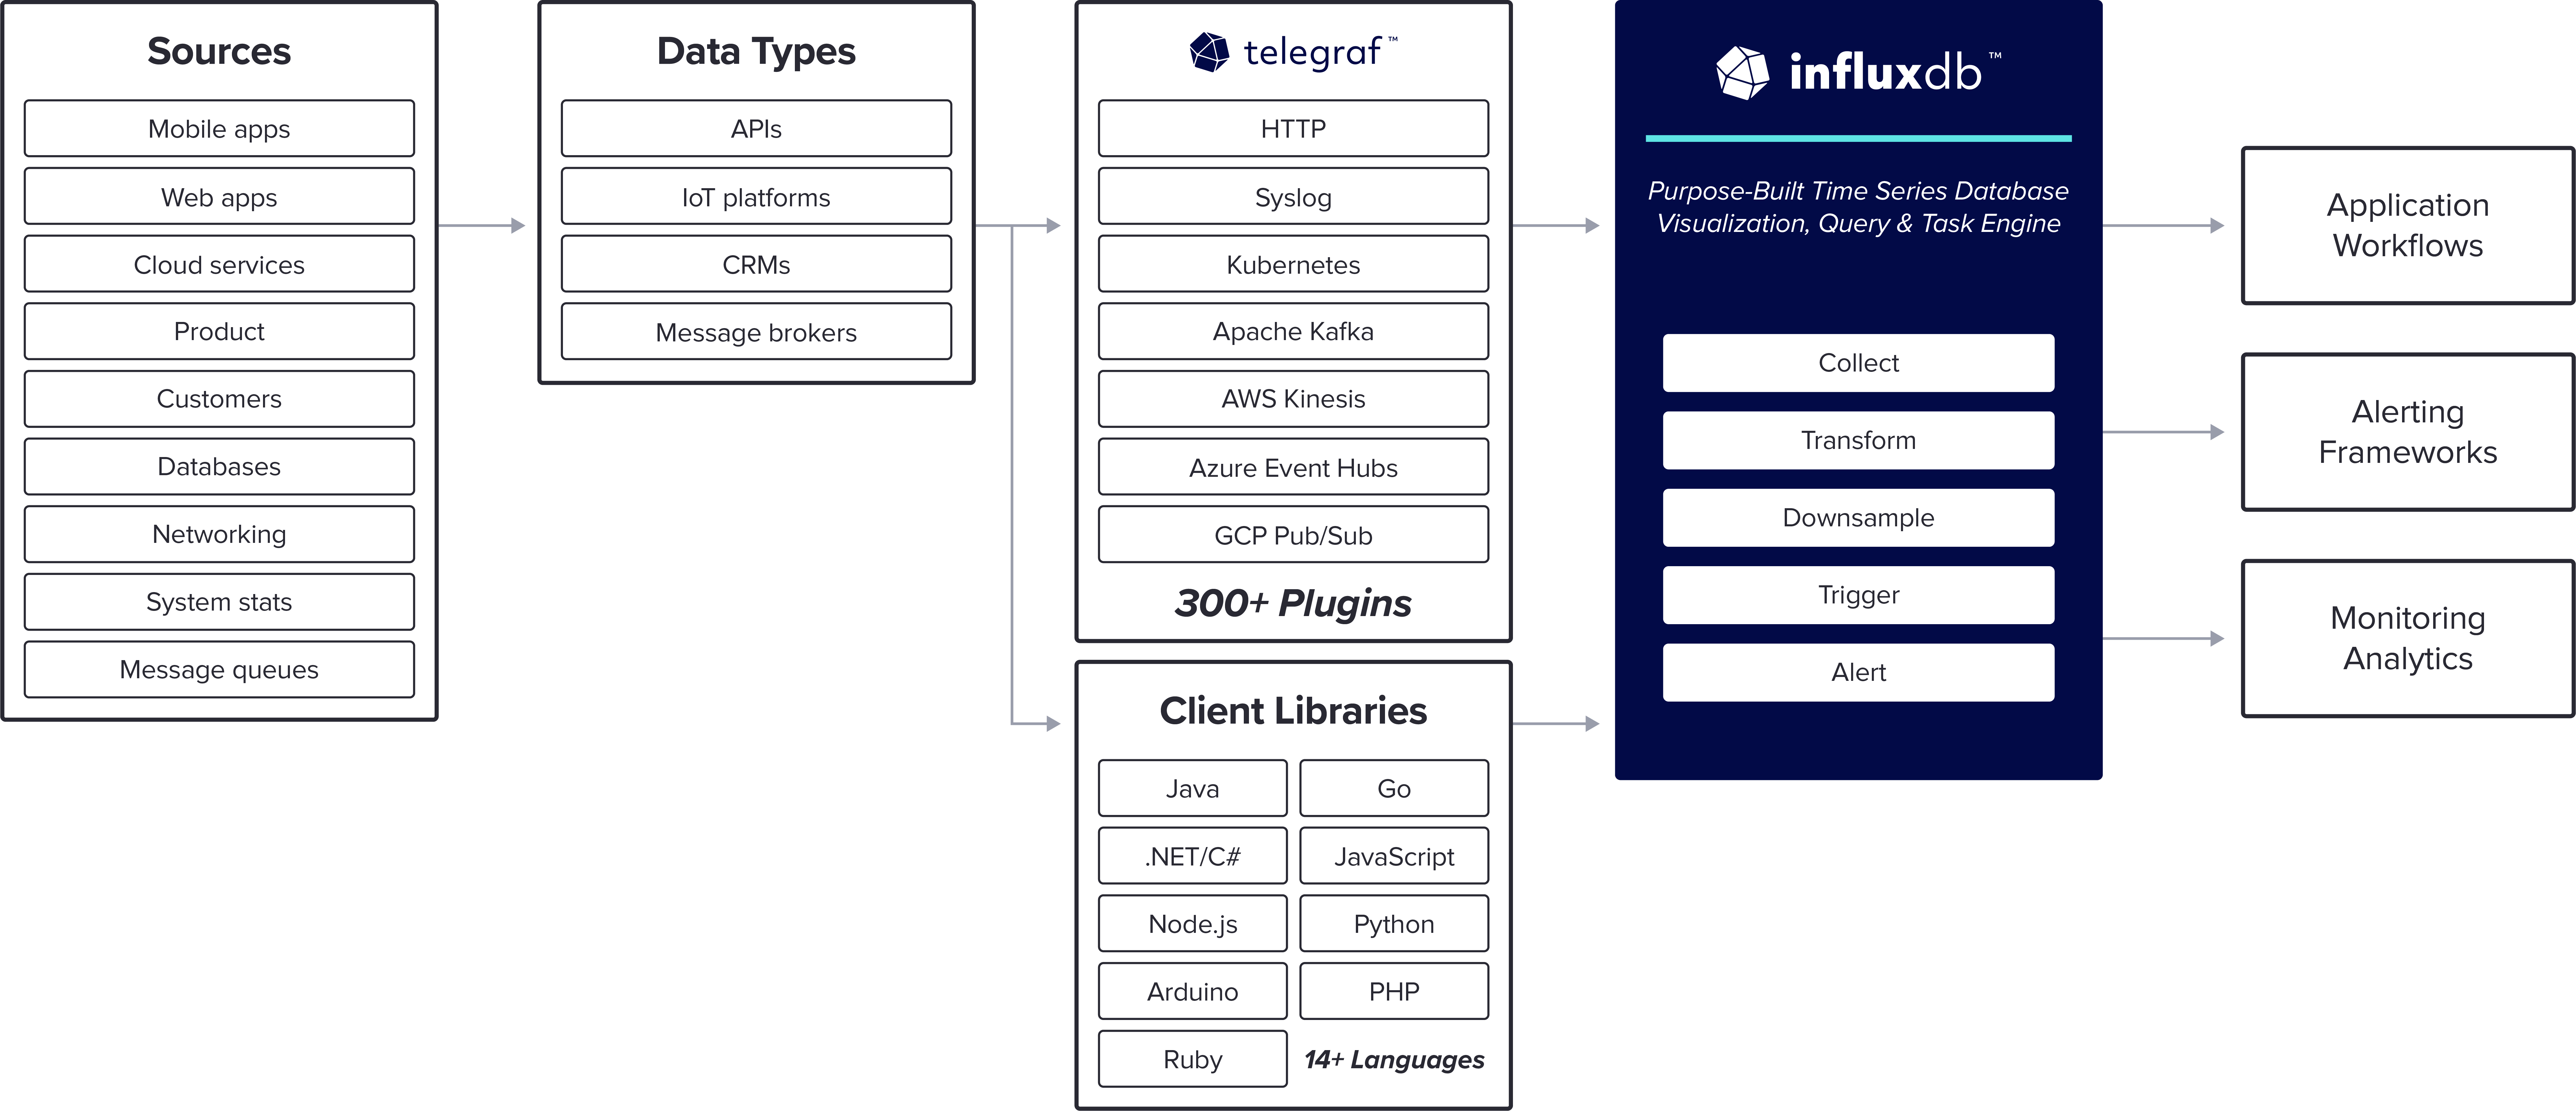 Reference Architecture – Cloud Applications w InfluxData Diagram